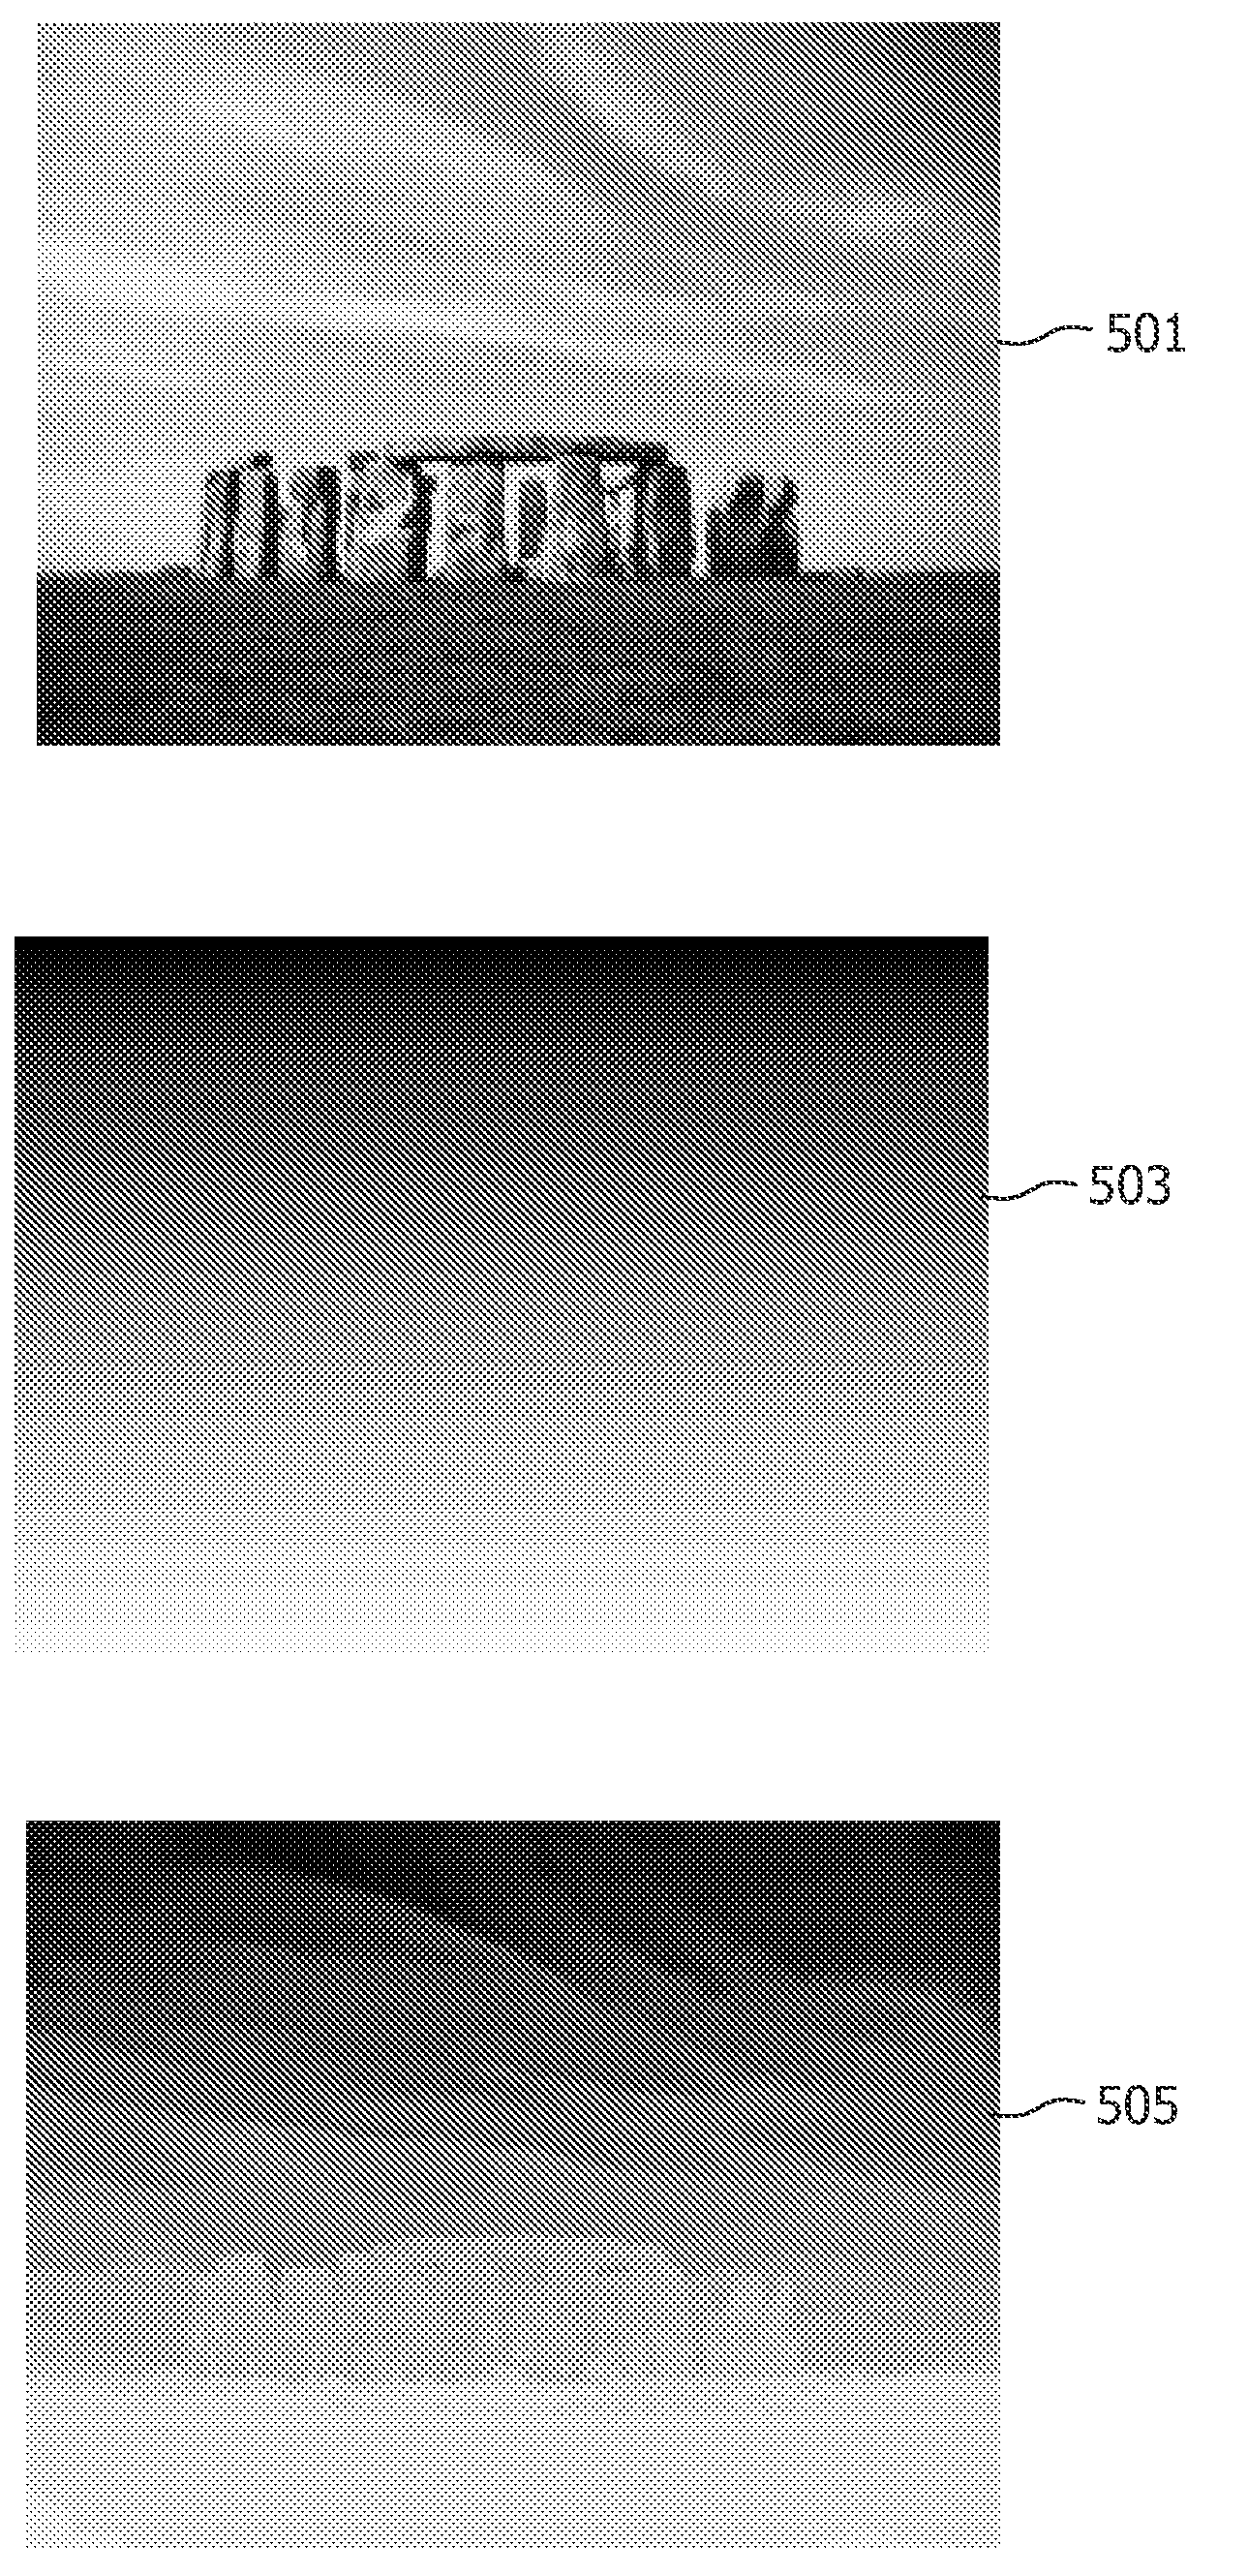 Generation of depth map for an image